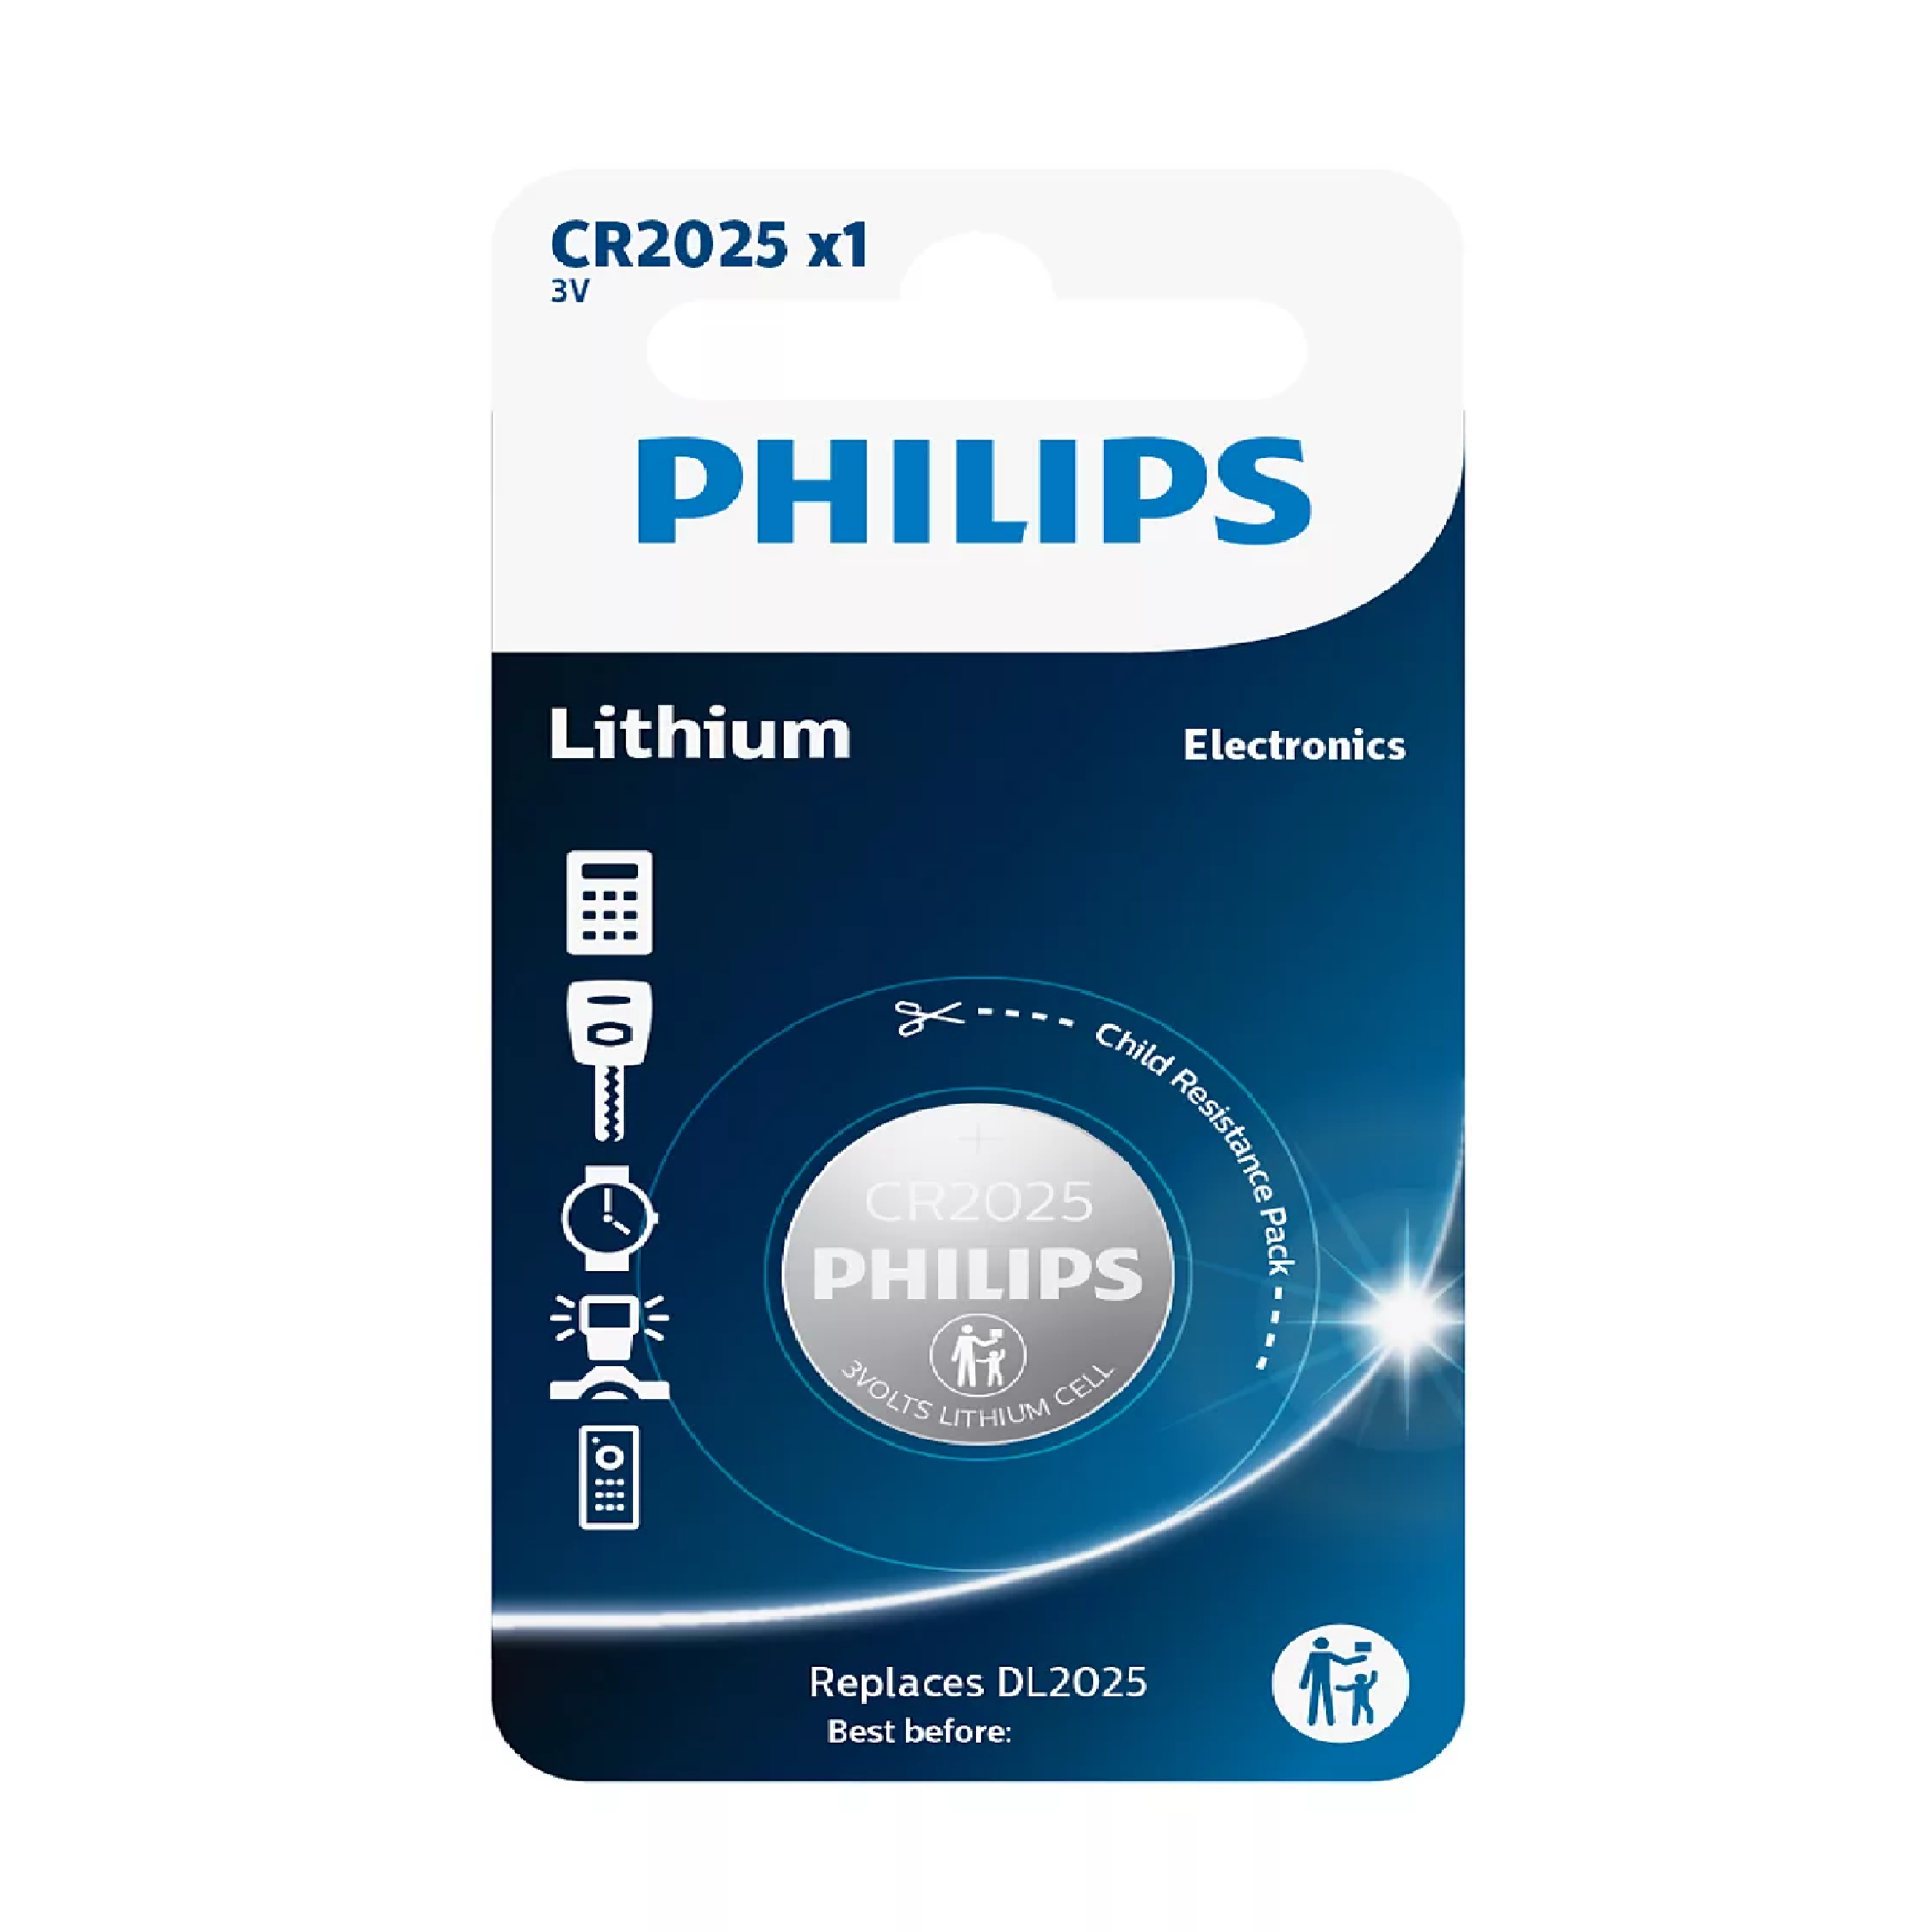 Philips 3V CR2025 BUTTOM Lithium Minicell Battery